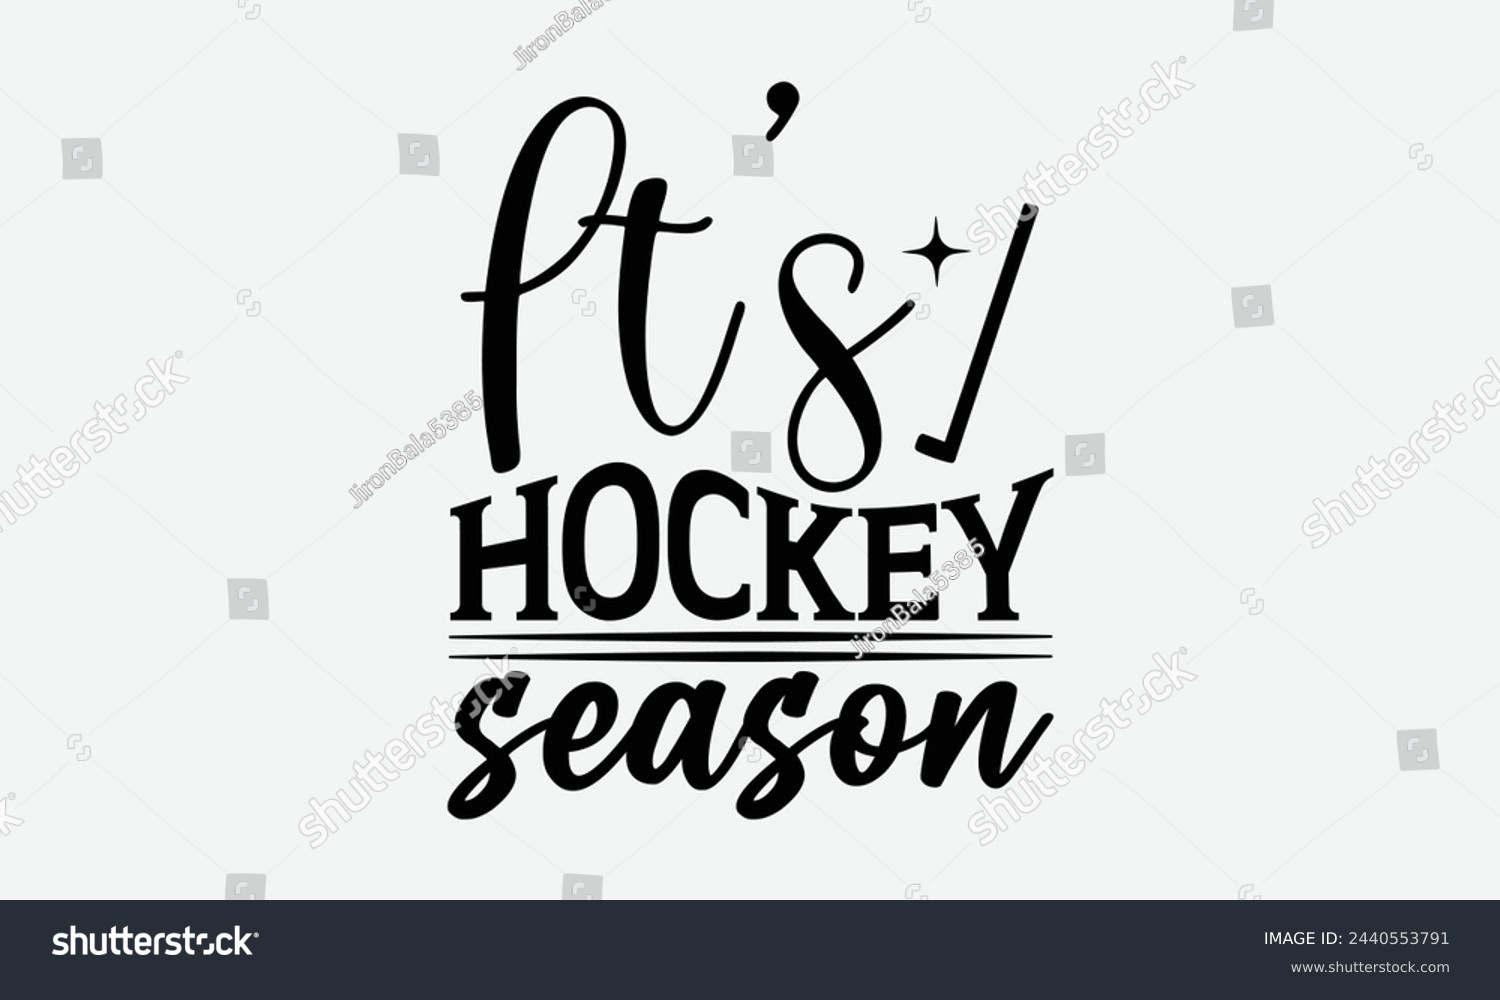 SVG of It’s Hockey Season - Mom t-shirt design, isolated on white background, this illustration can be used as a print on t-shirts and bags, cover book, template, stationary or as a poster. svg